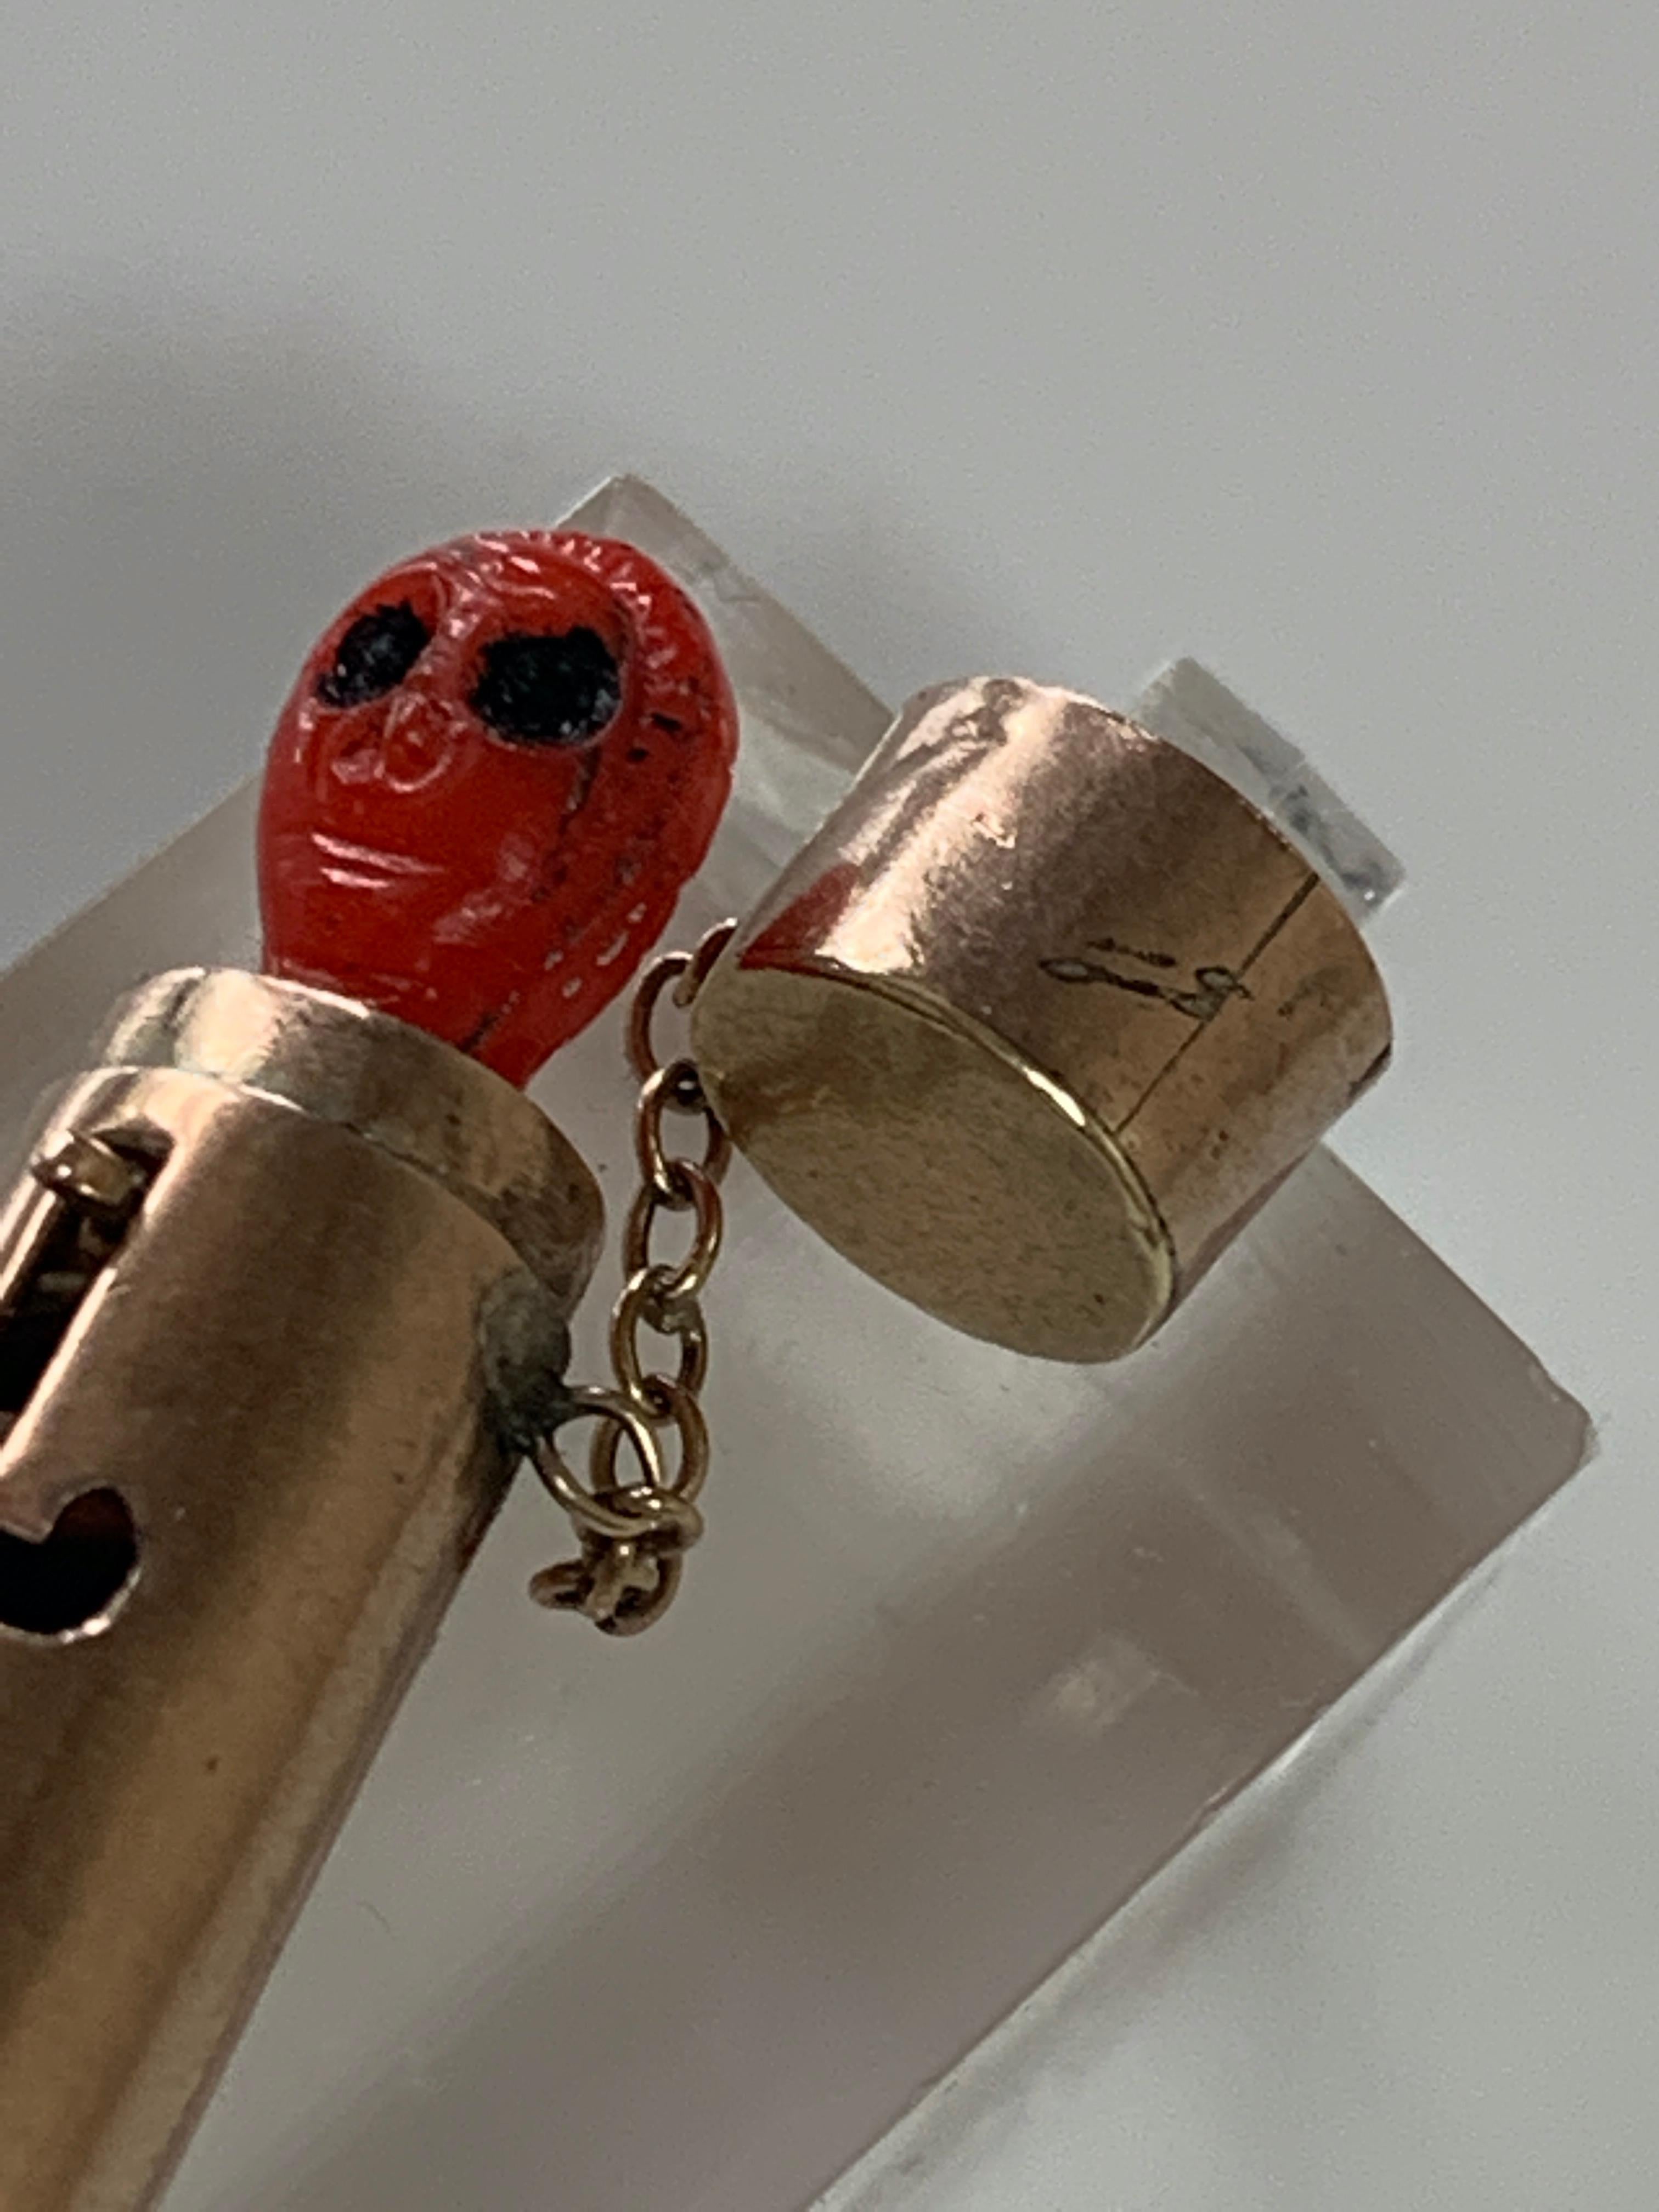 Rare 9ct 375 Gold Canister with pop up mechanism 
Era 1950s
Chain attached to lid
Push slightly down on the alien head then move across the release handle
and it springs up.
Alien head appears to be Bakelite ? - early plastic/acrylic
all over item